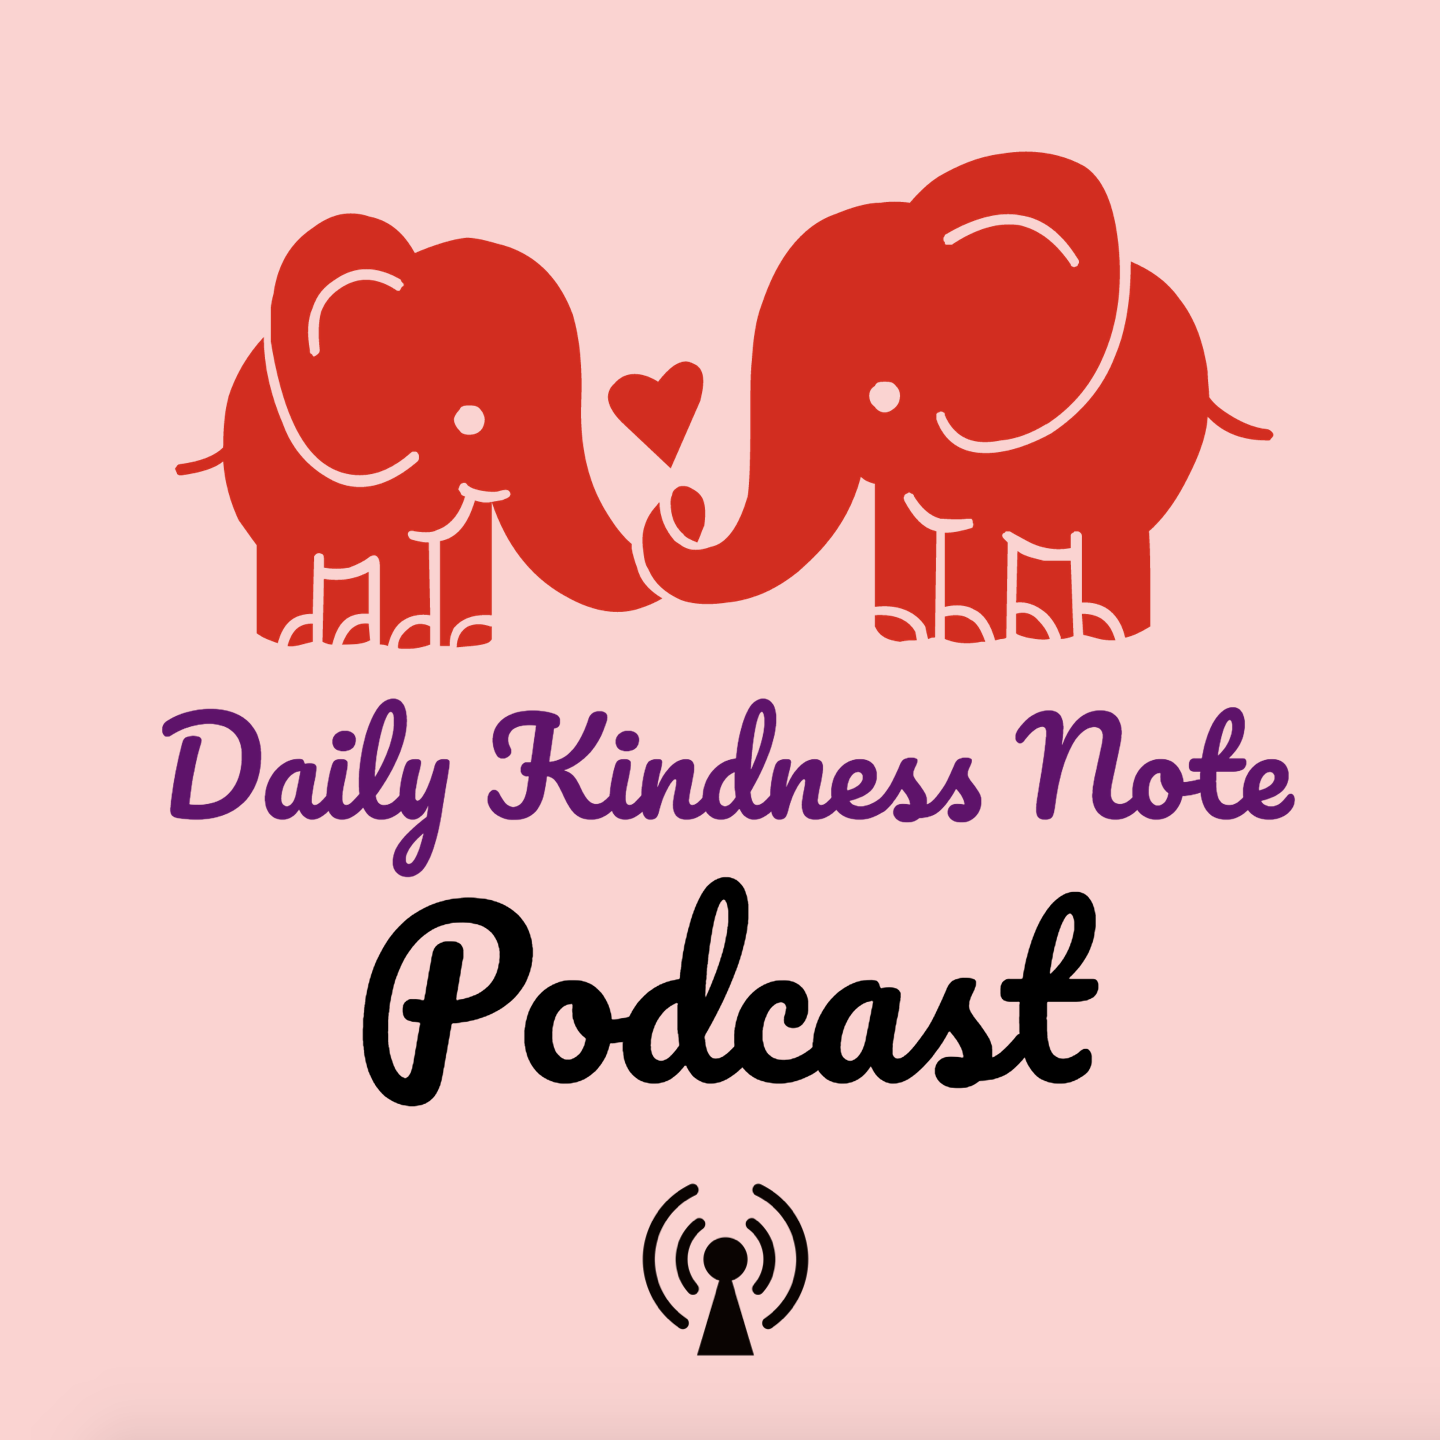 Daily Kindness Note Podcast - BONUS EPISODE! Ep. 7: Take Care of Yourself - Just Go For It!